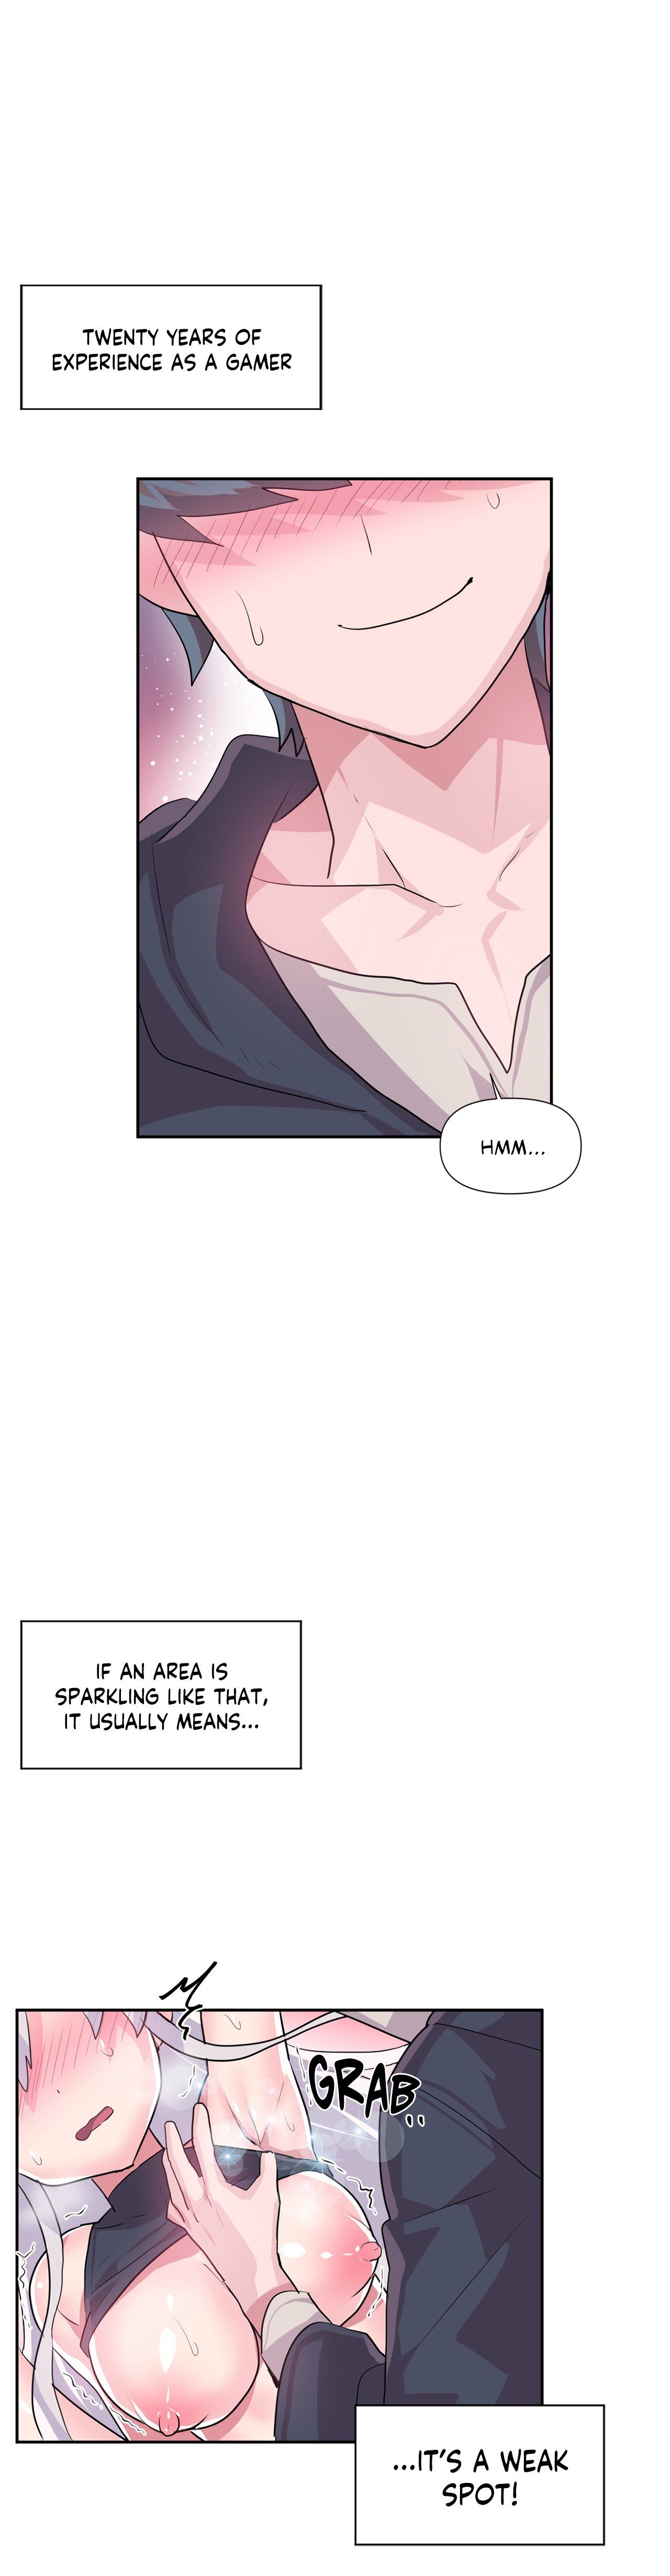 log-in-to-lust-a-land-chap-30-11